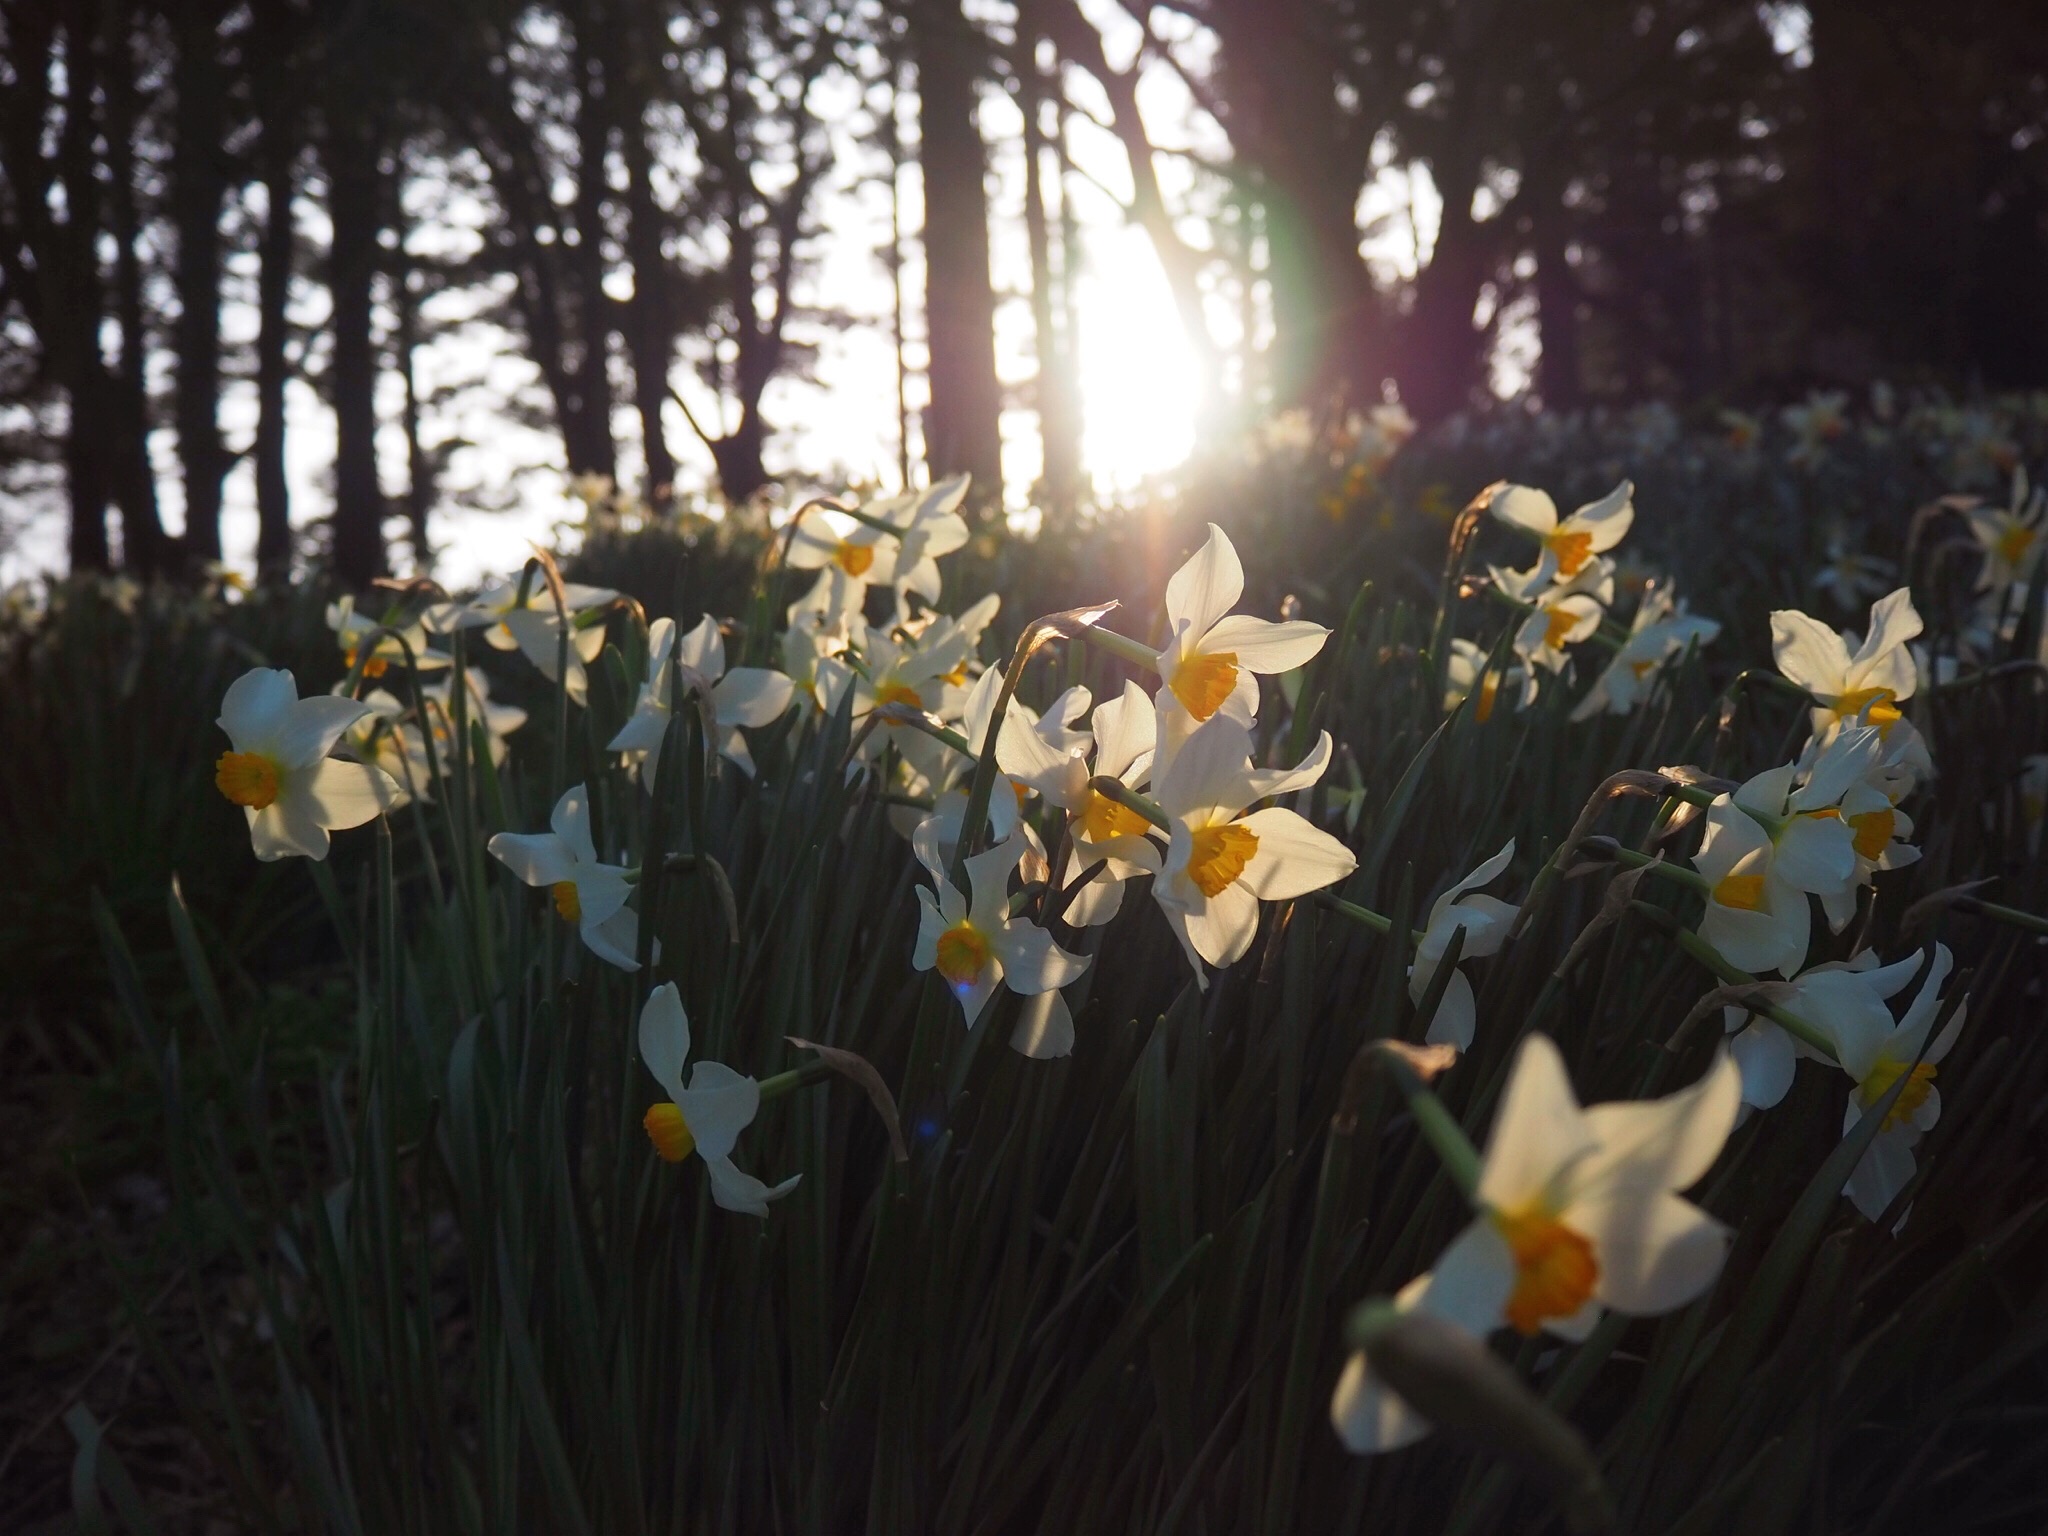 daffodils in evening light